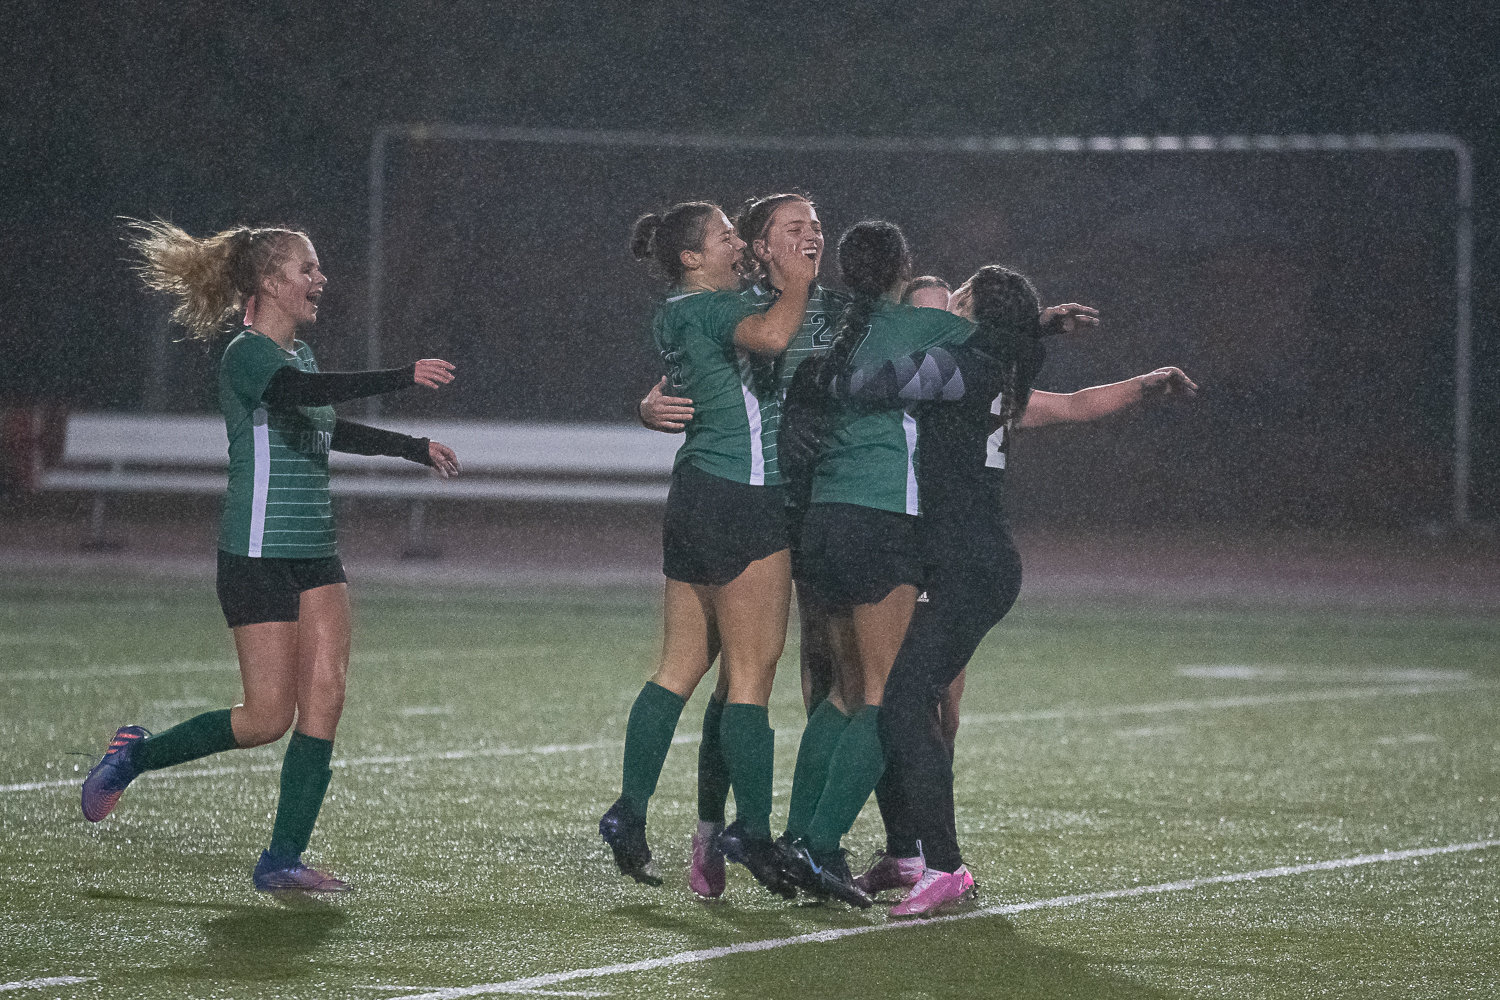 The Tumwater girls soccer team celebrates after winning the 2A District 4 title against Columbia River Nov. 3.